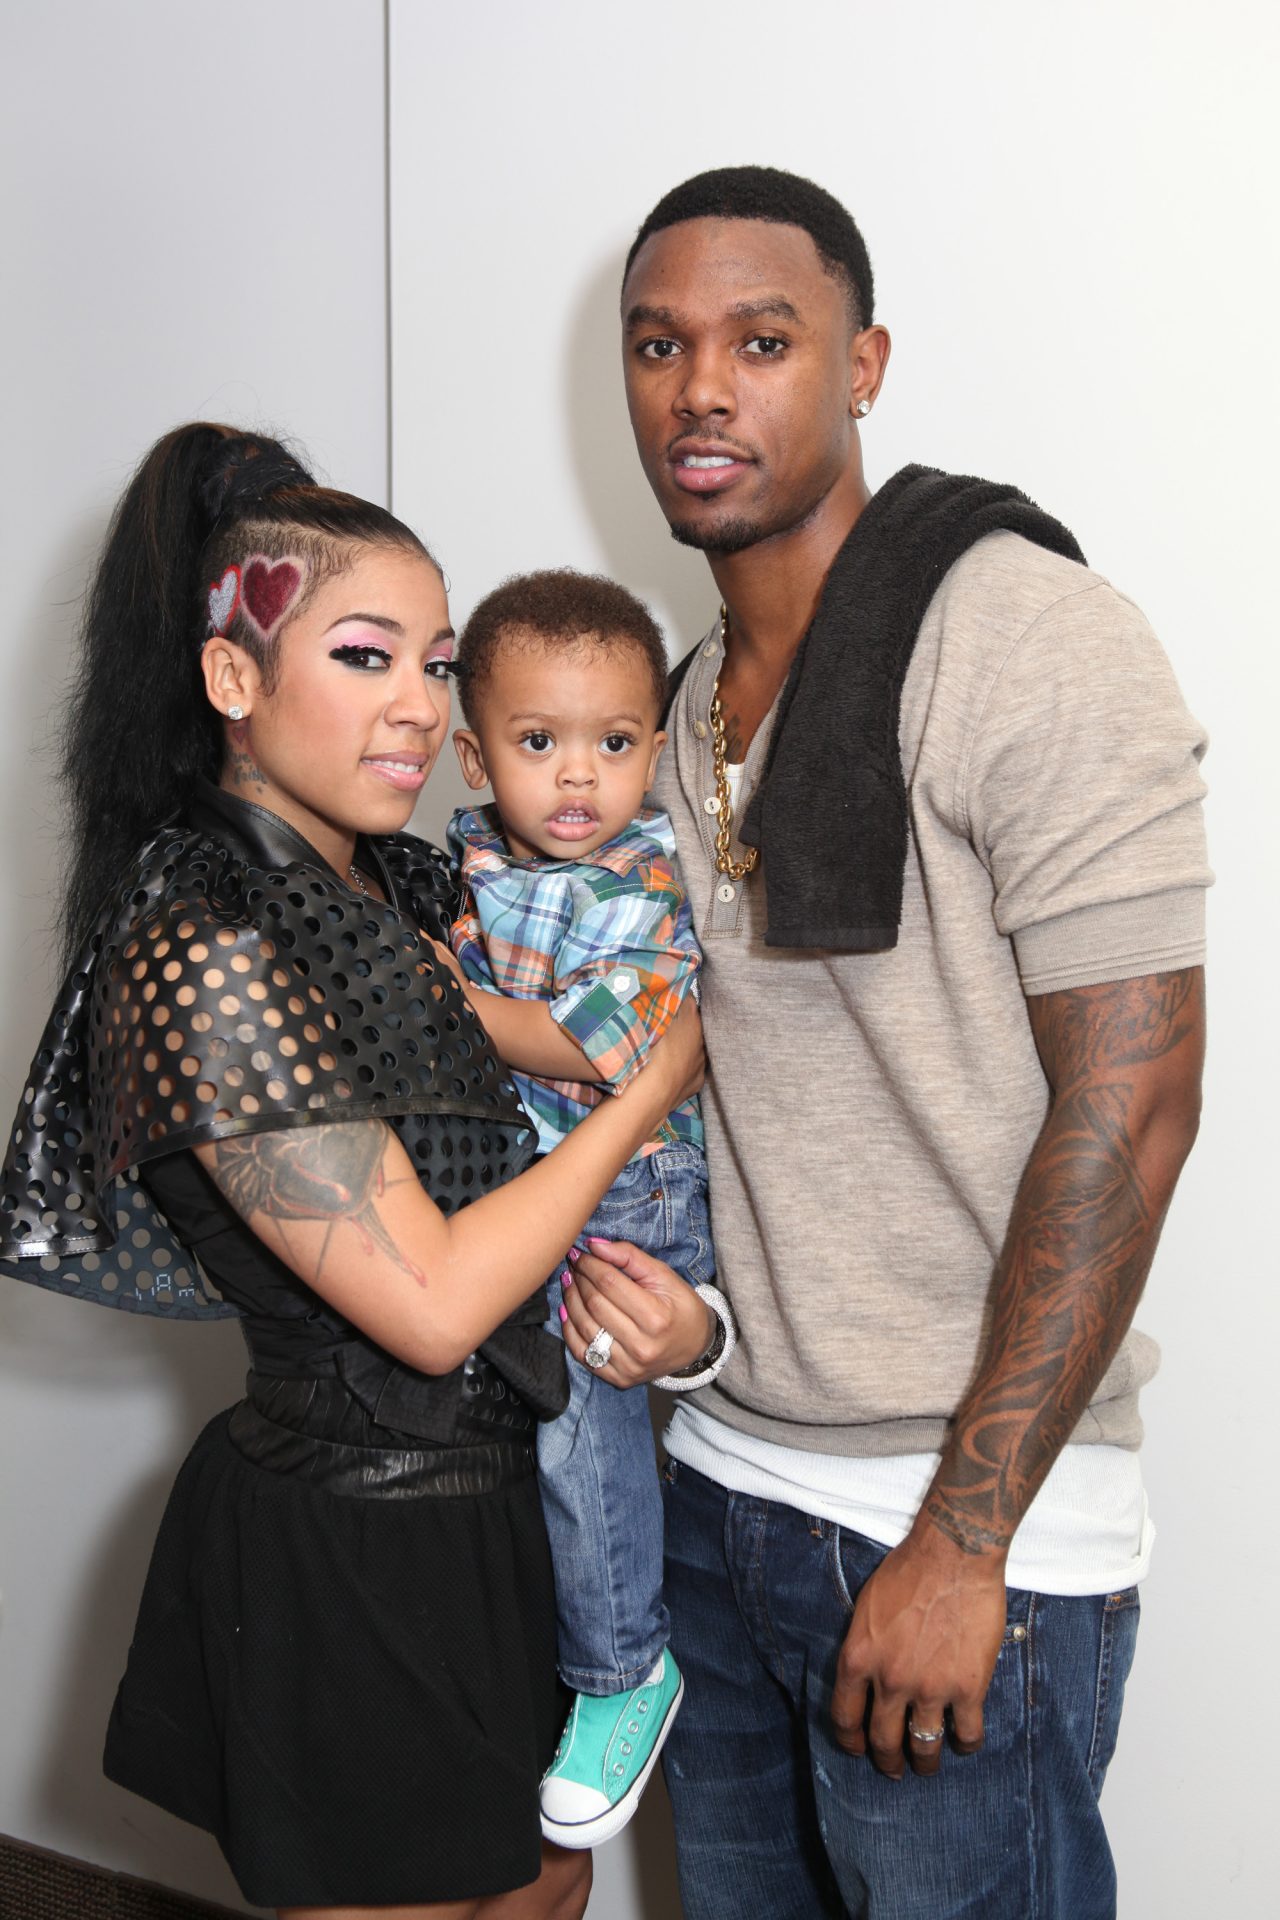 Bad Luck Lover Girl? Here’s A Rundown Of Keyshia Cole’s Exes